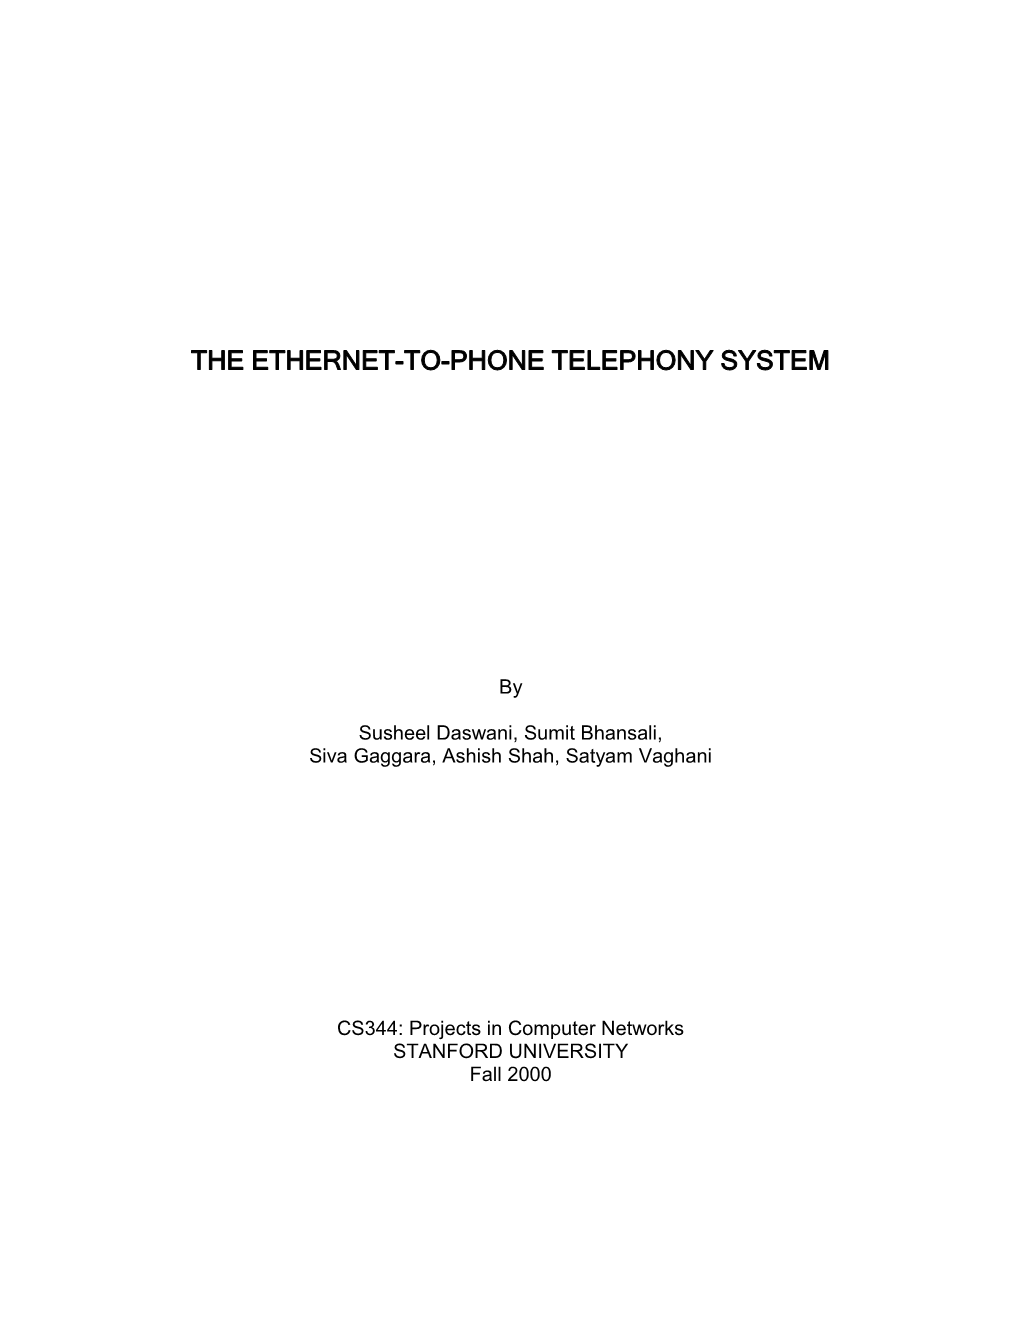 The Ethernet-To-Phone Telephony System